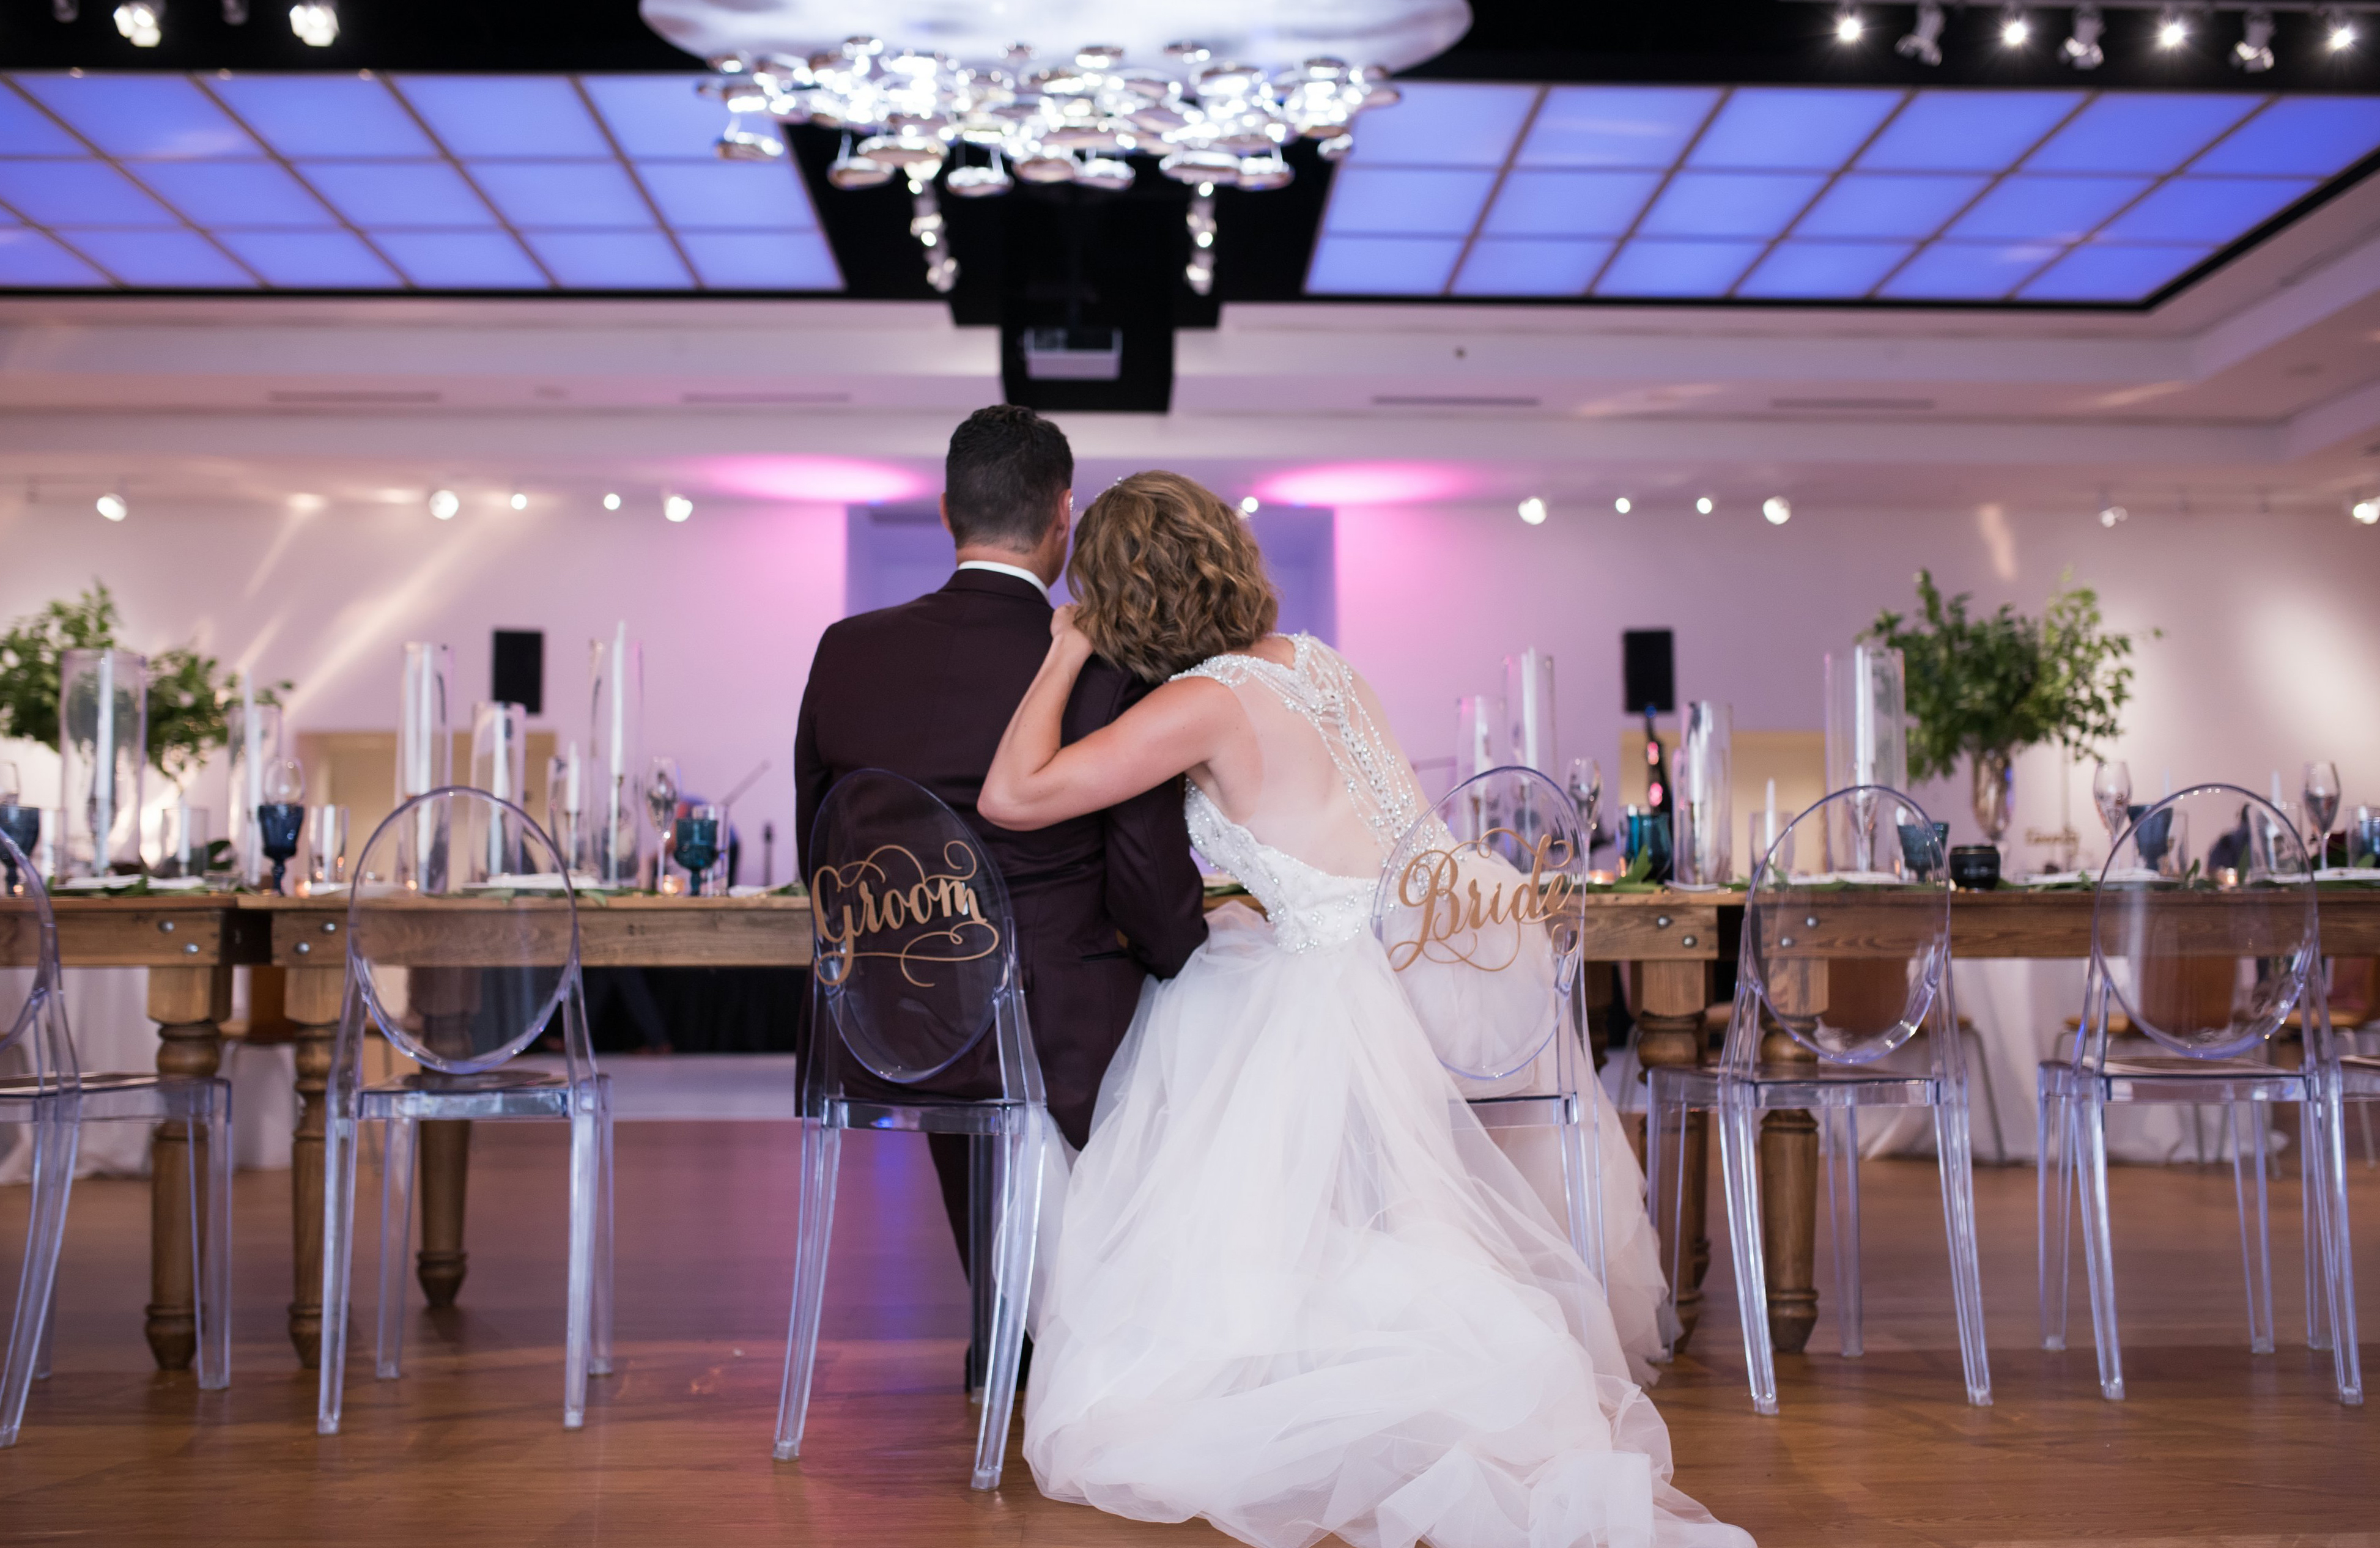 View More: http://mojicaphotography.pass.us/bridal-bash-2016-kc